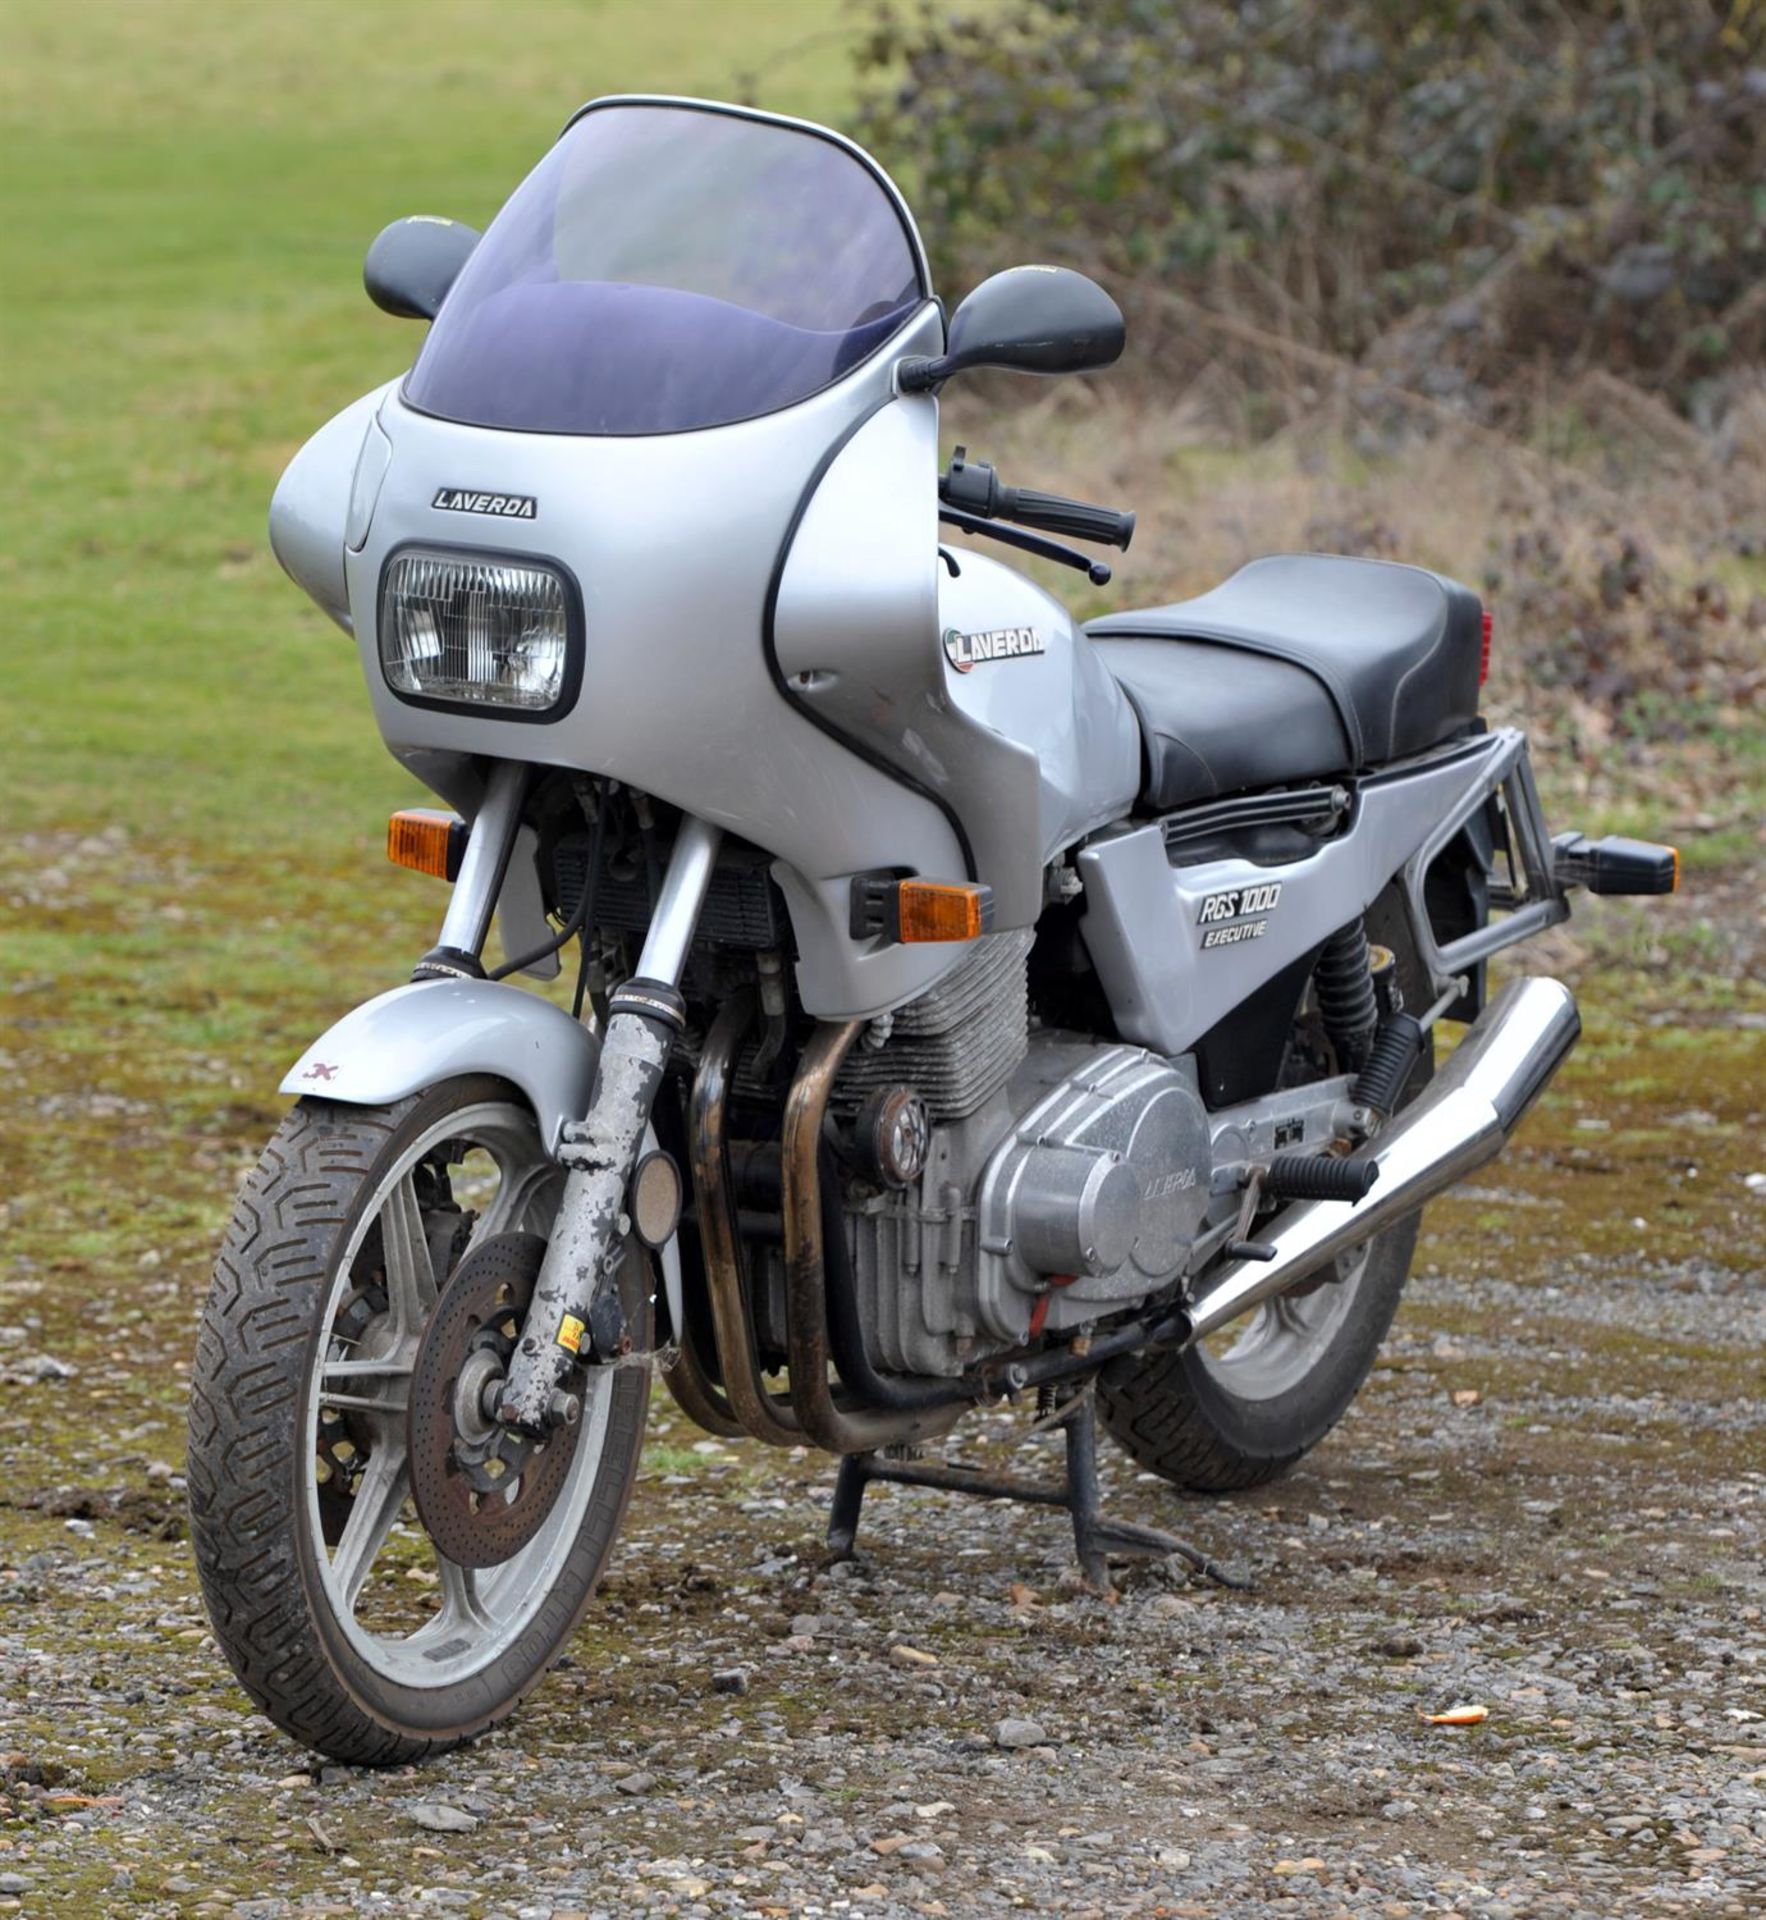 Motor Bike, Laverda RGS 1000 Executive, silver chassis, registration number D718 HPR, 1.8cc.